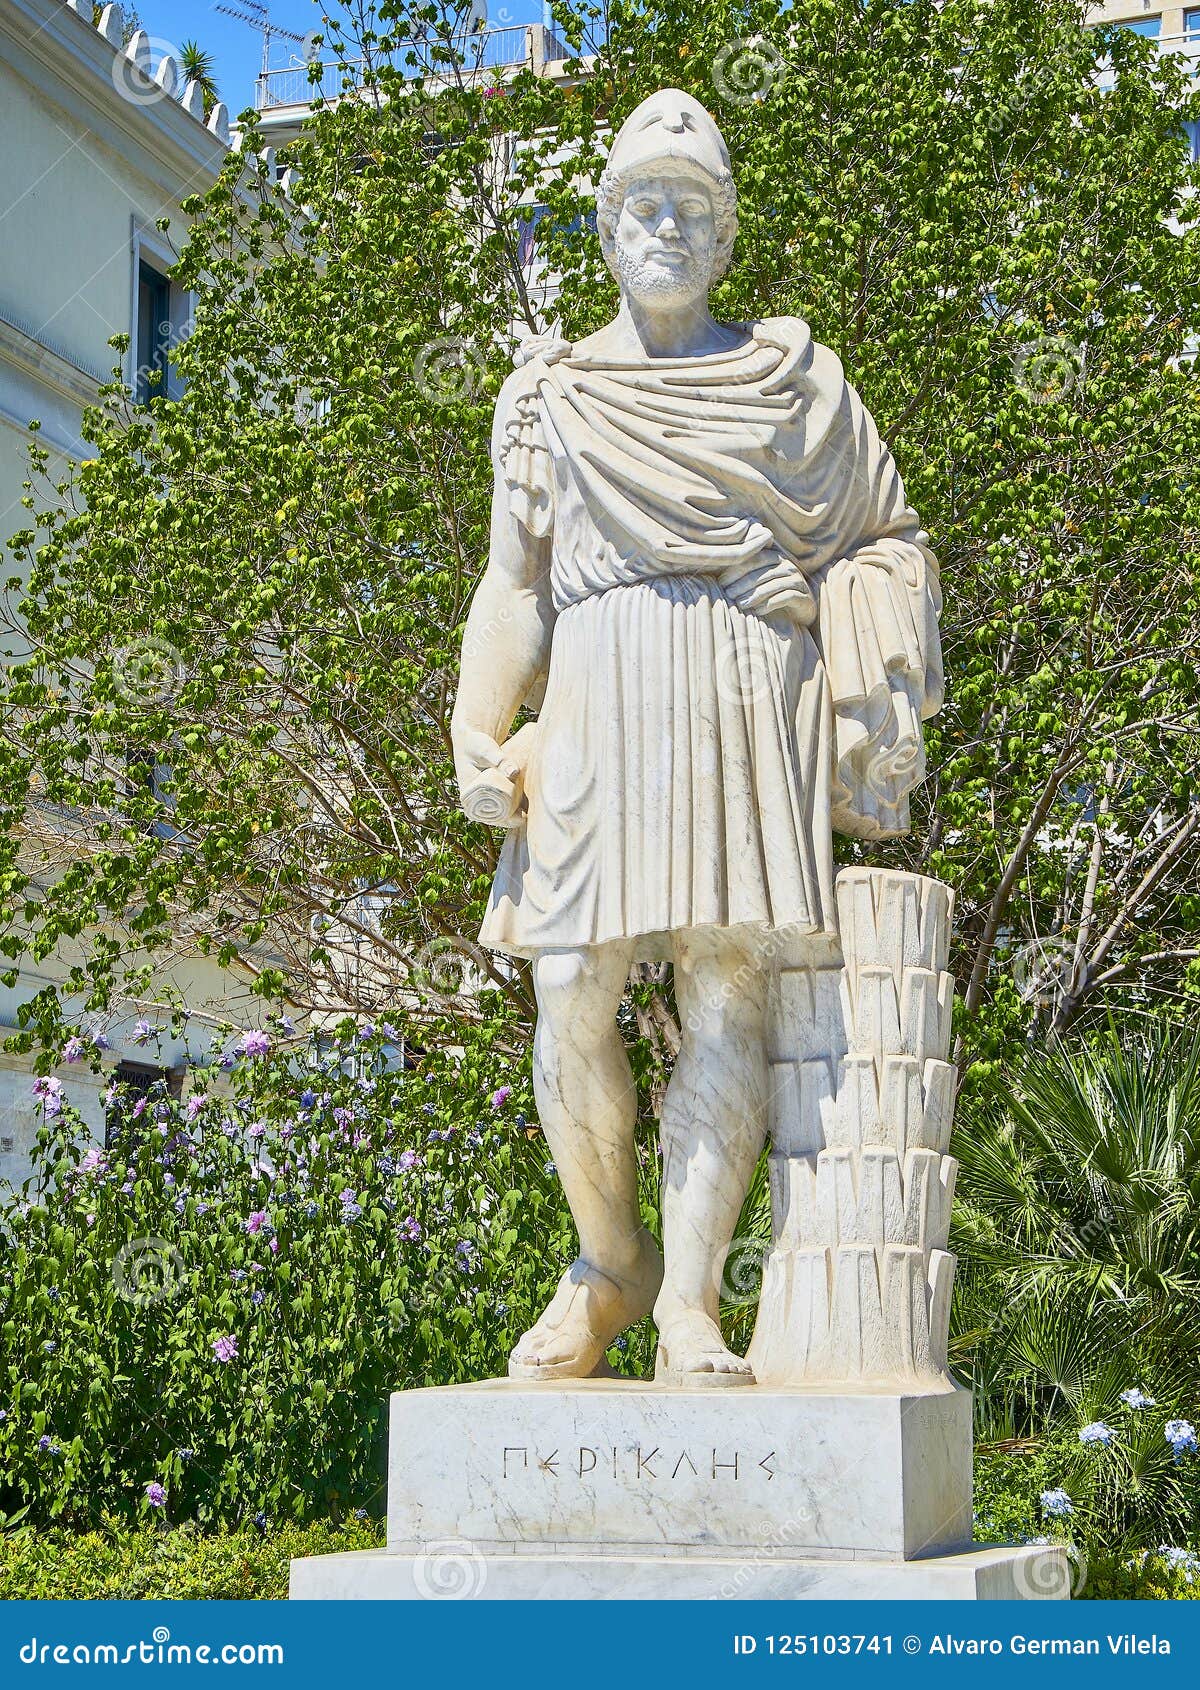 statue of pericles at the athinas street of athens. attica, greece.